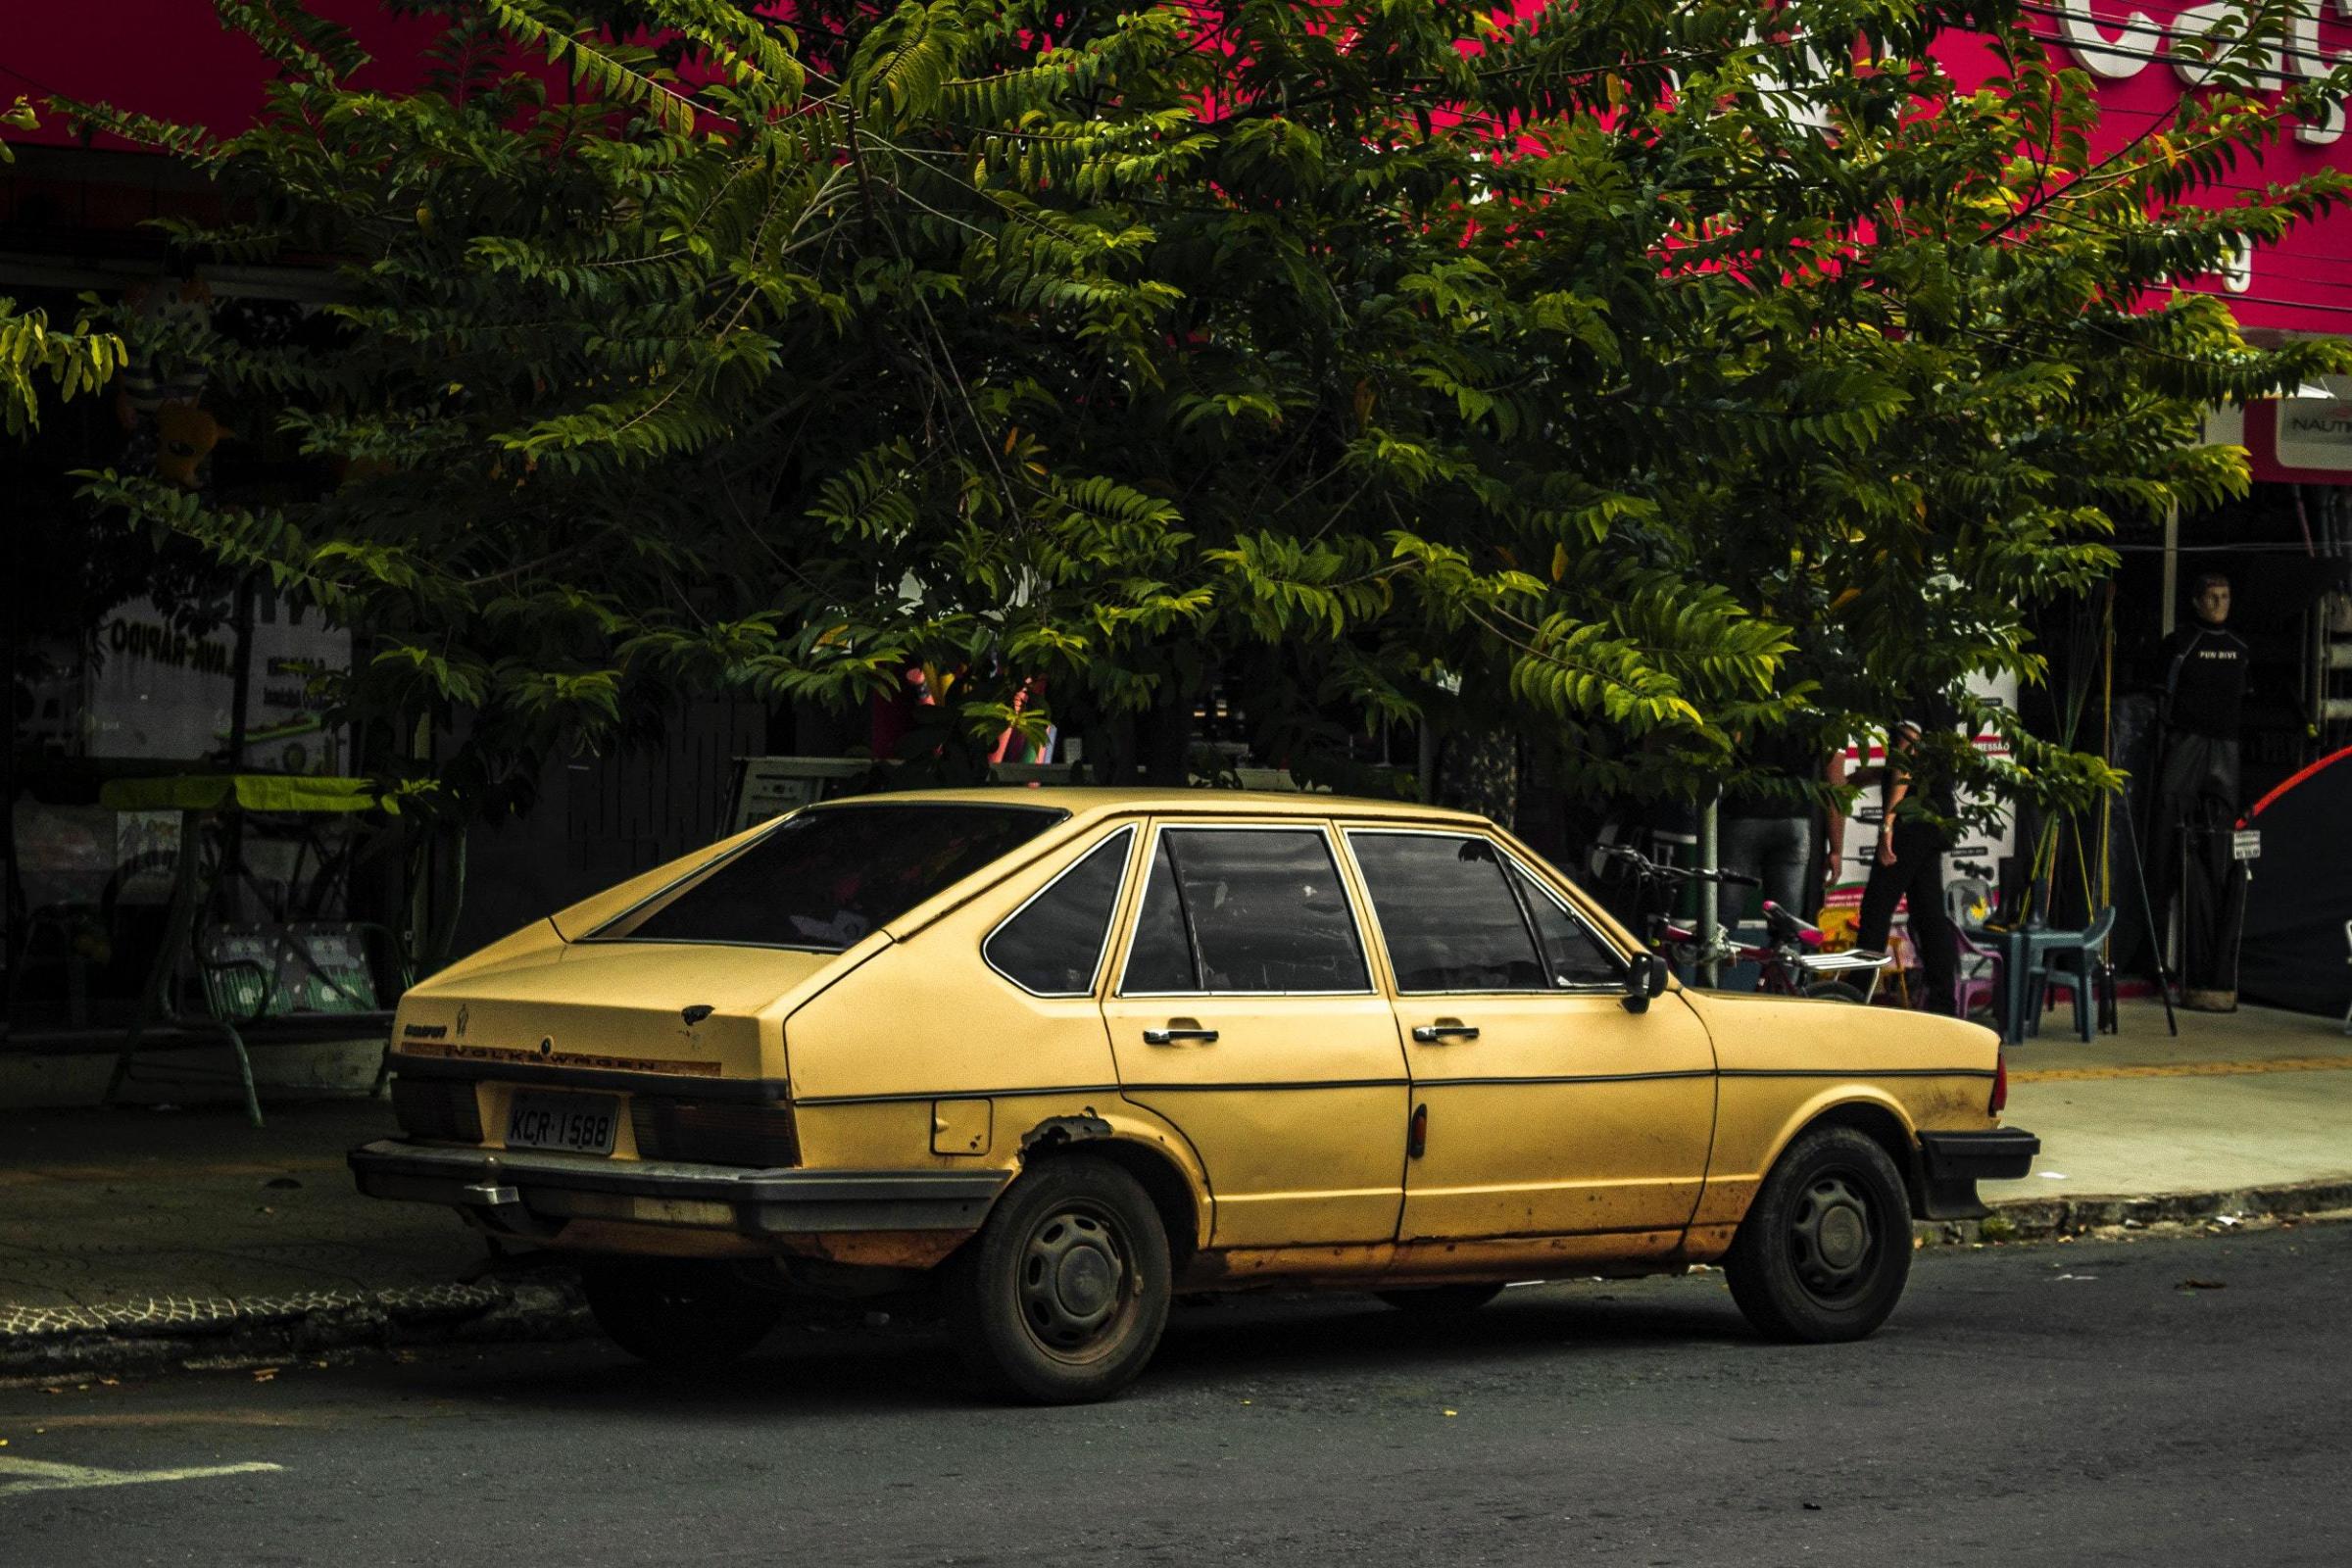 Classic or banger? Brett Ellis muses on the perils of buying a second hand car. Photo: PIxabay